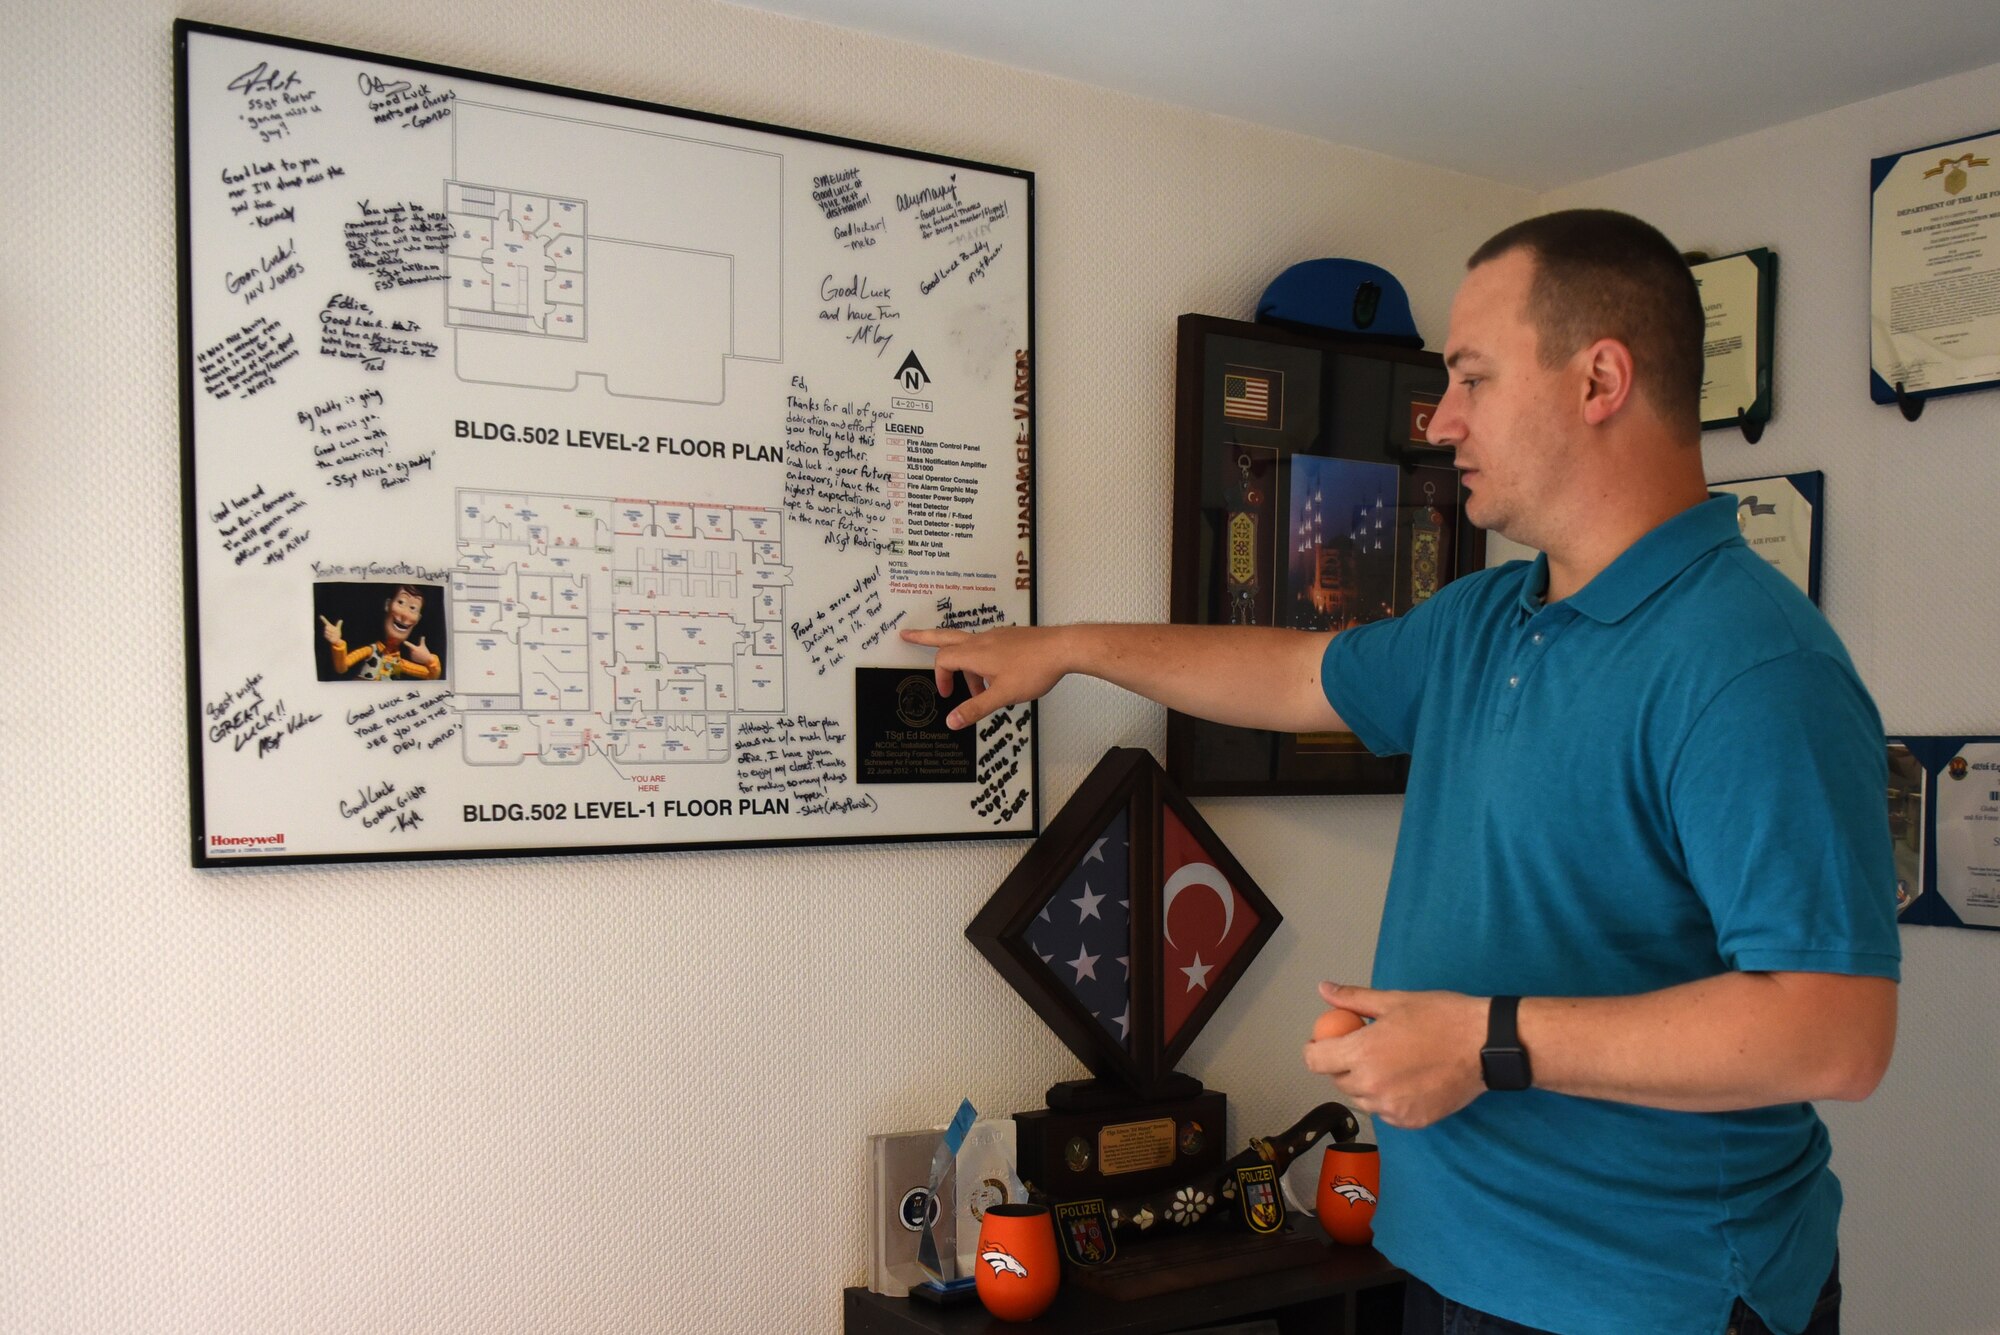 U.S. Air Force Tech. Sgt. Edwin Bowser, 569th U.S. Forces Police Squadron flight sergeant, tells the story behind the going away gift he received from a past duty station that now hangs on the wall of his home.